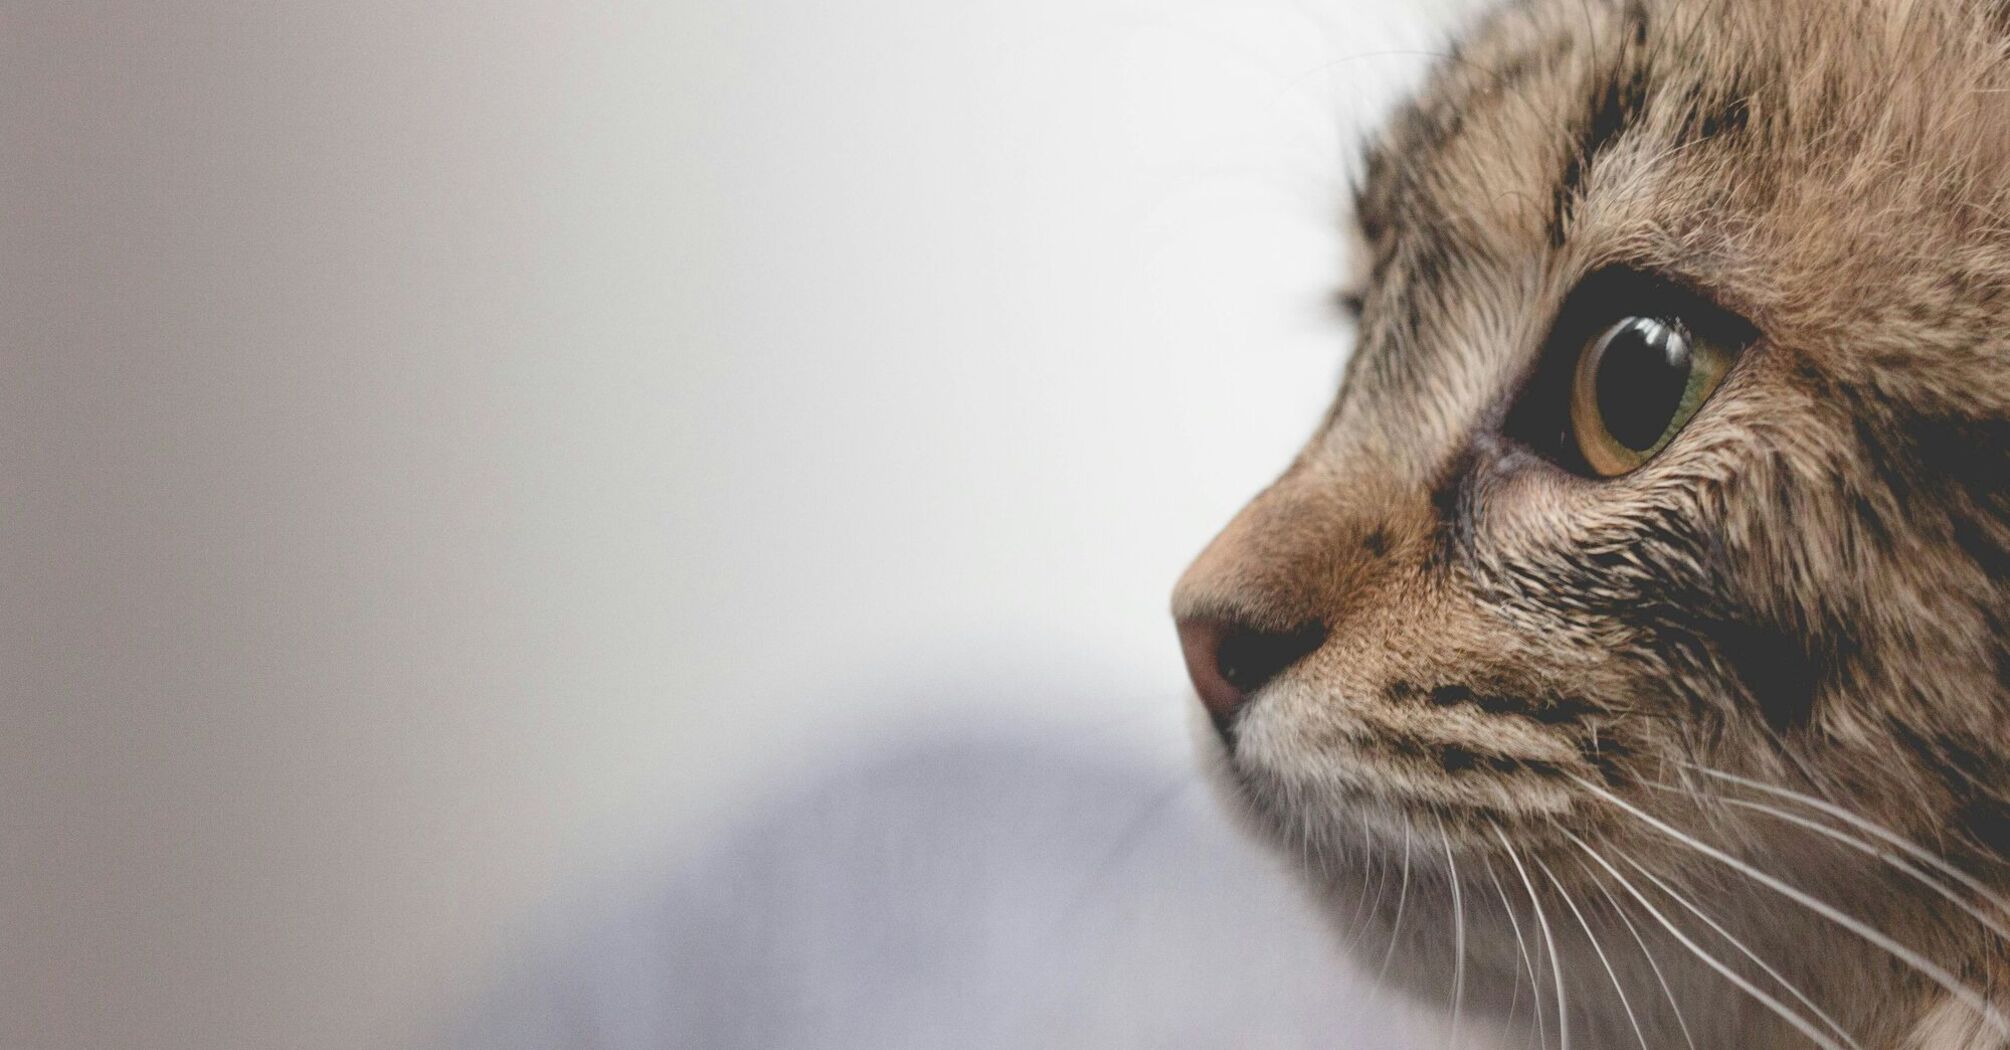 A close-up side profile of a fluffy tabby cat with a keen gaze